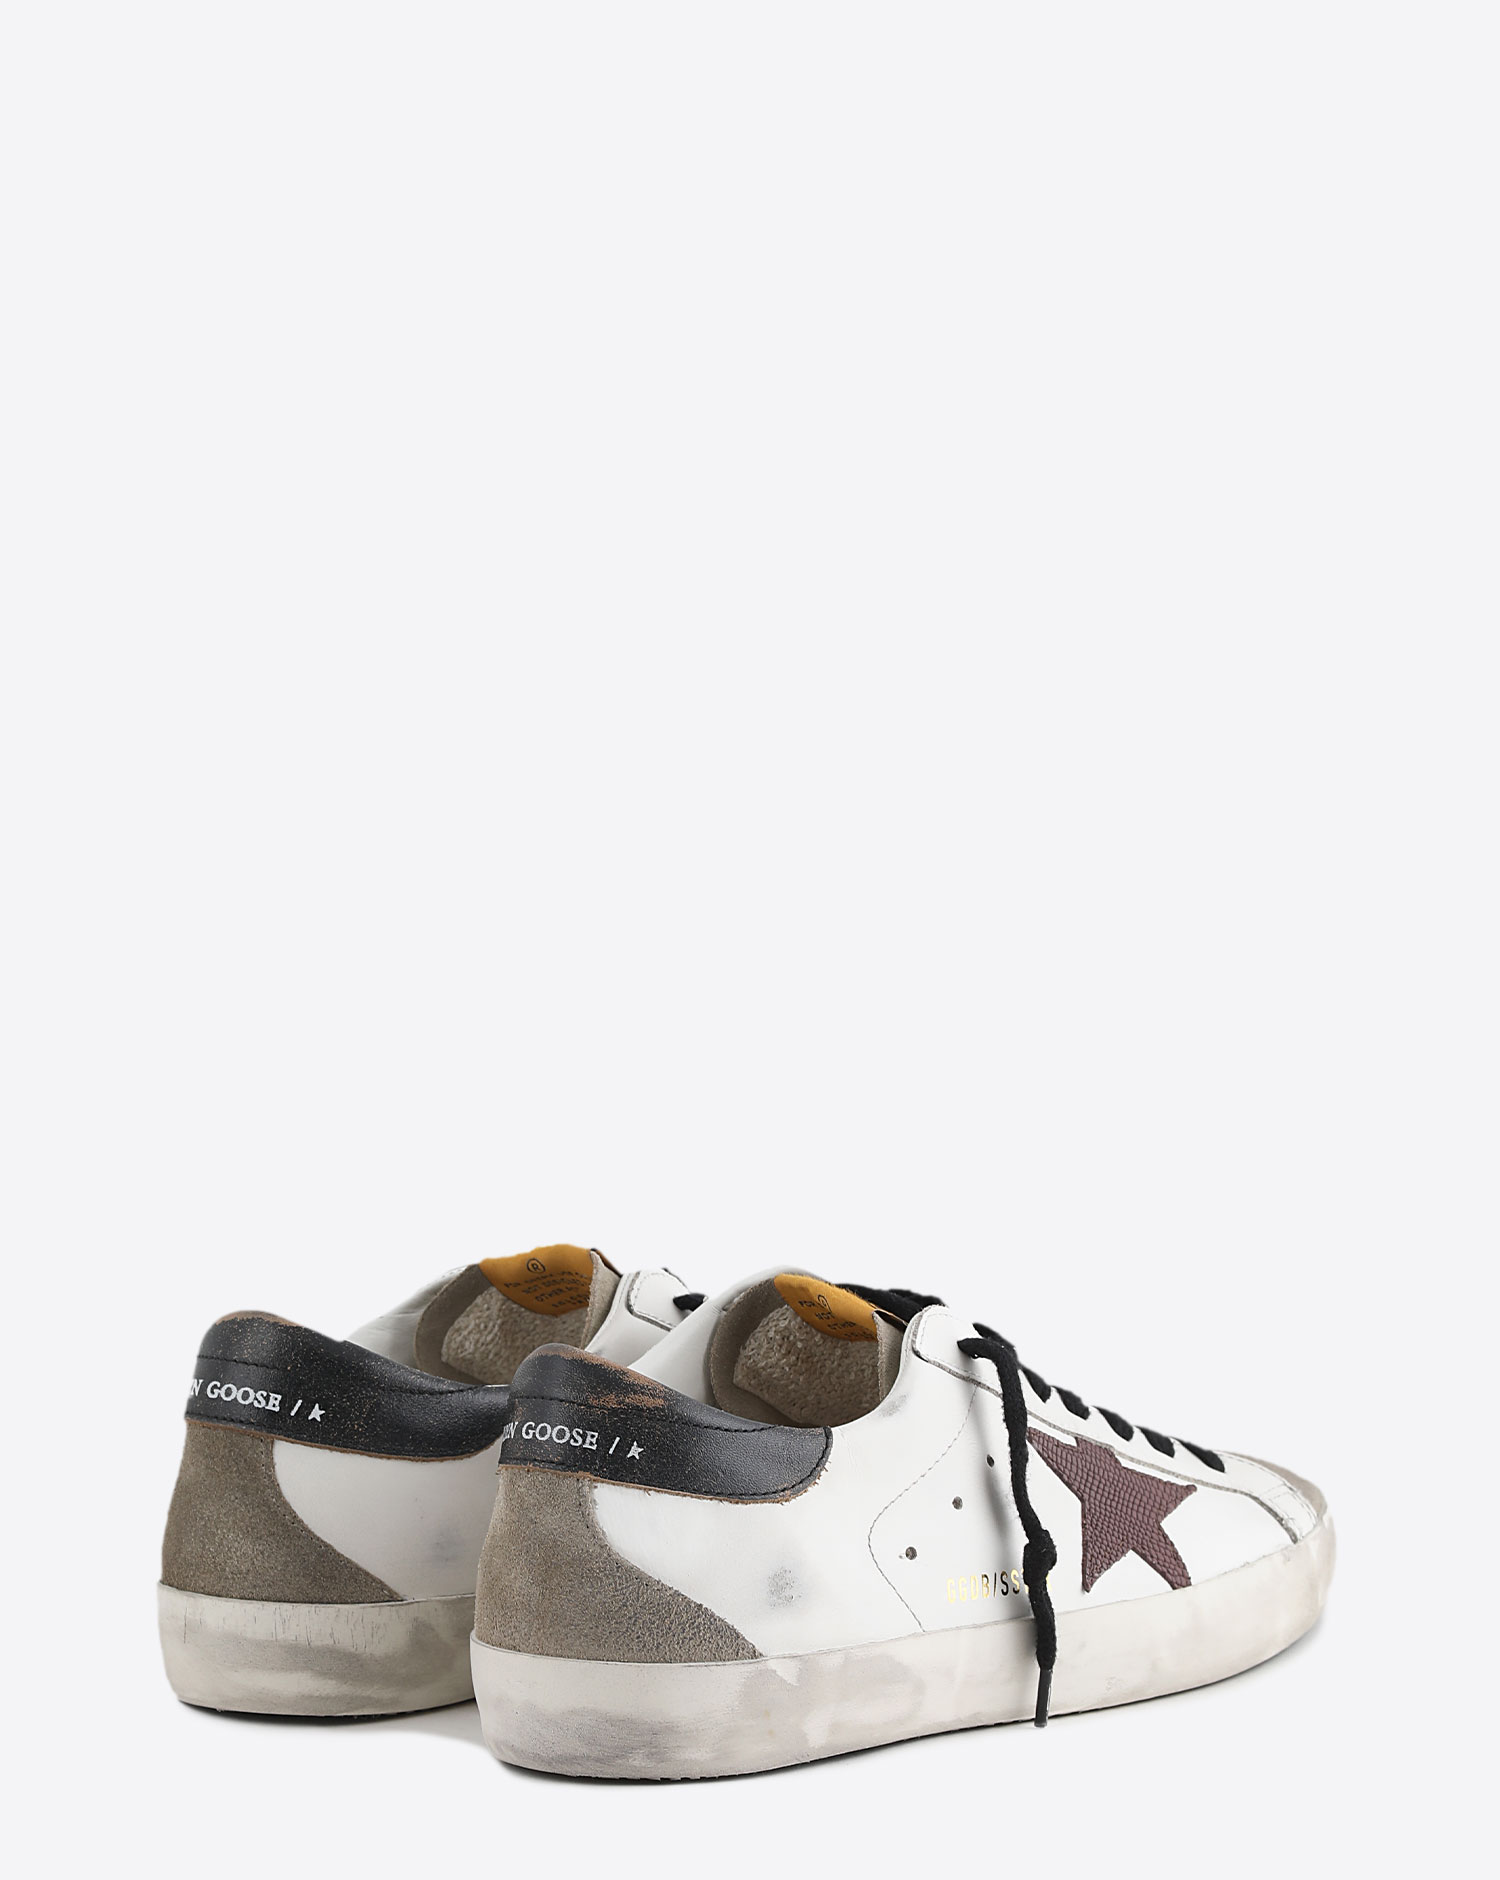 Sneakers Golden Goose  Super-Star White Taupe Bordeaux 11394 